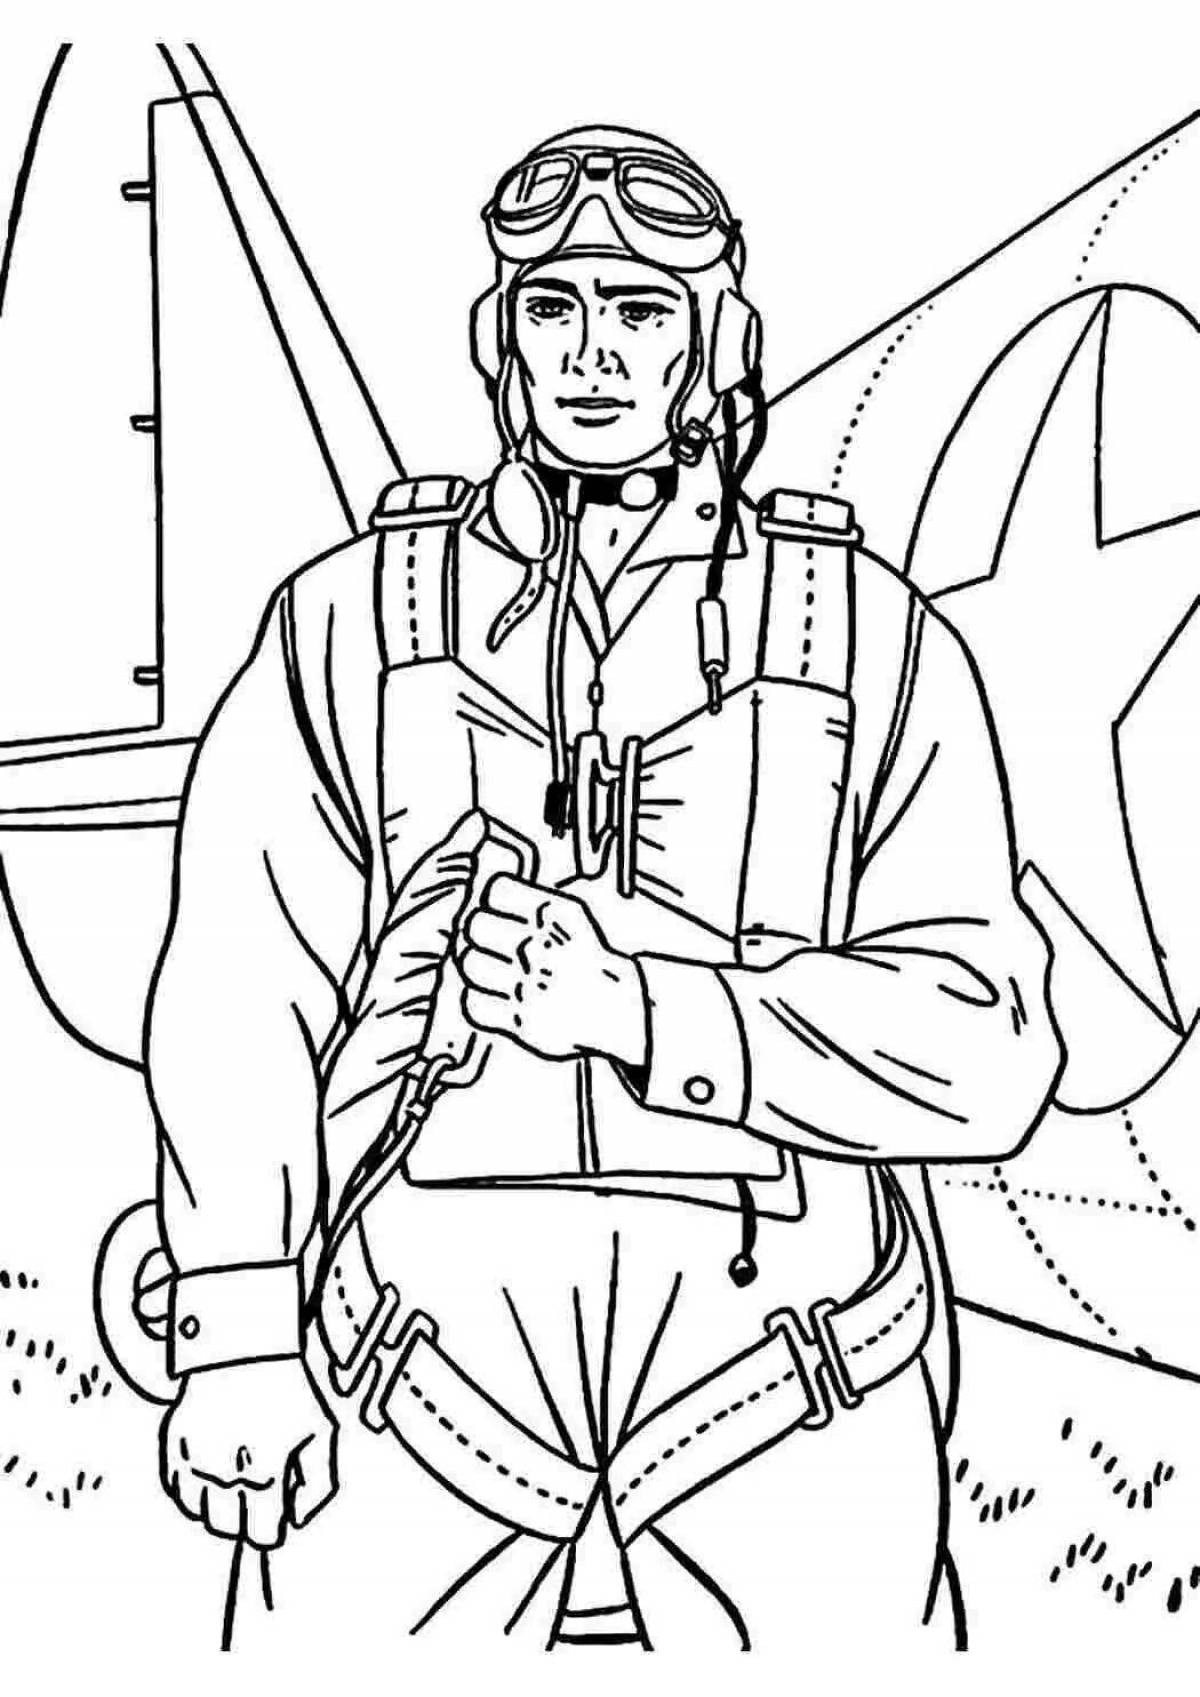 Adorable military pilot coloring page for kids